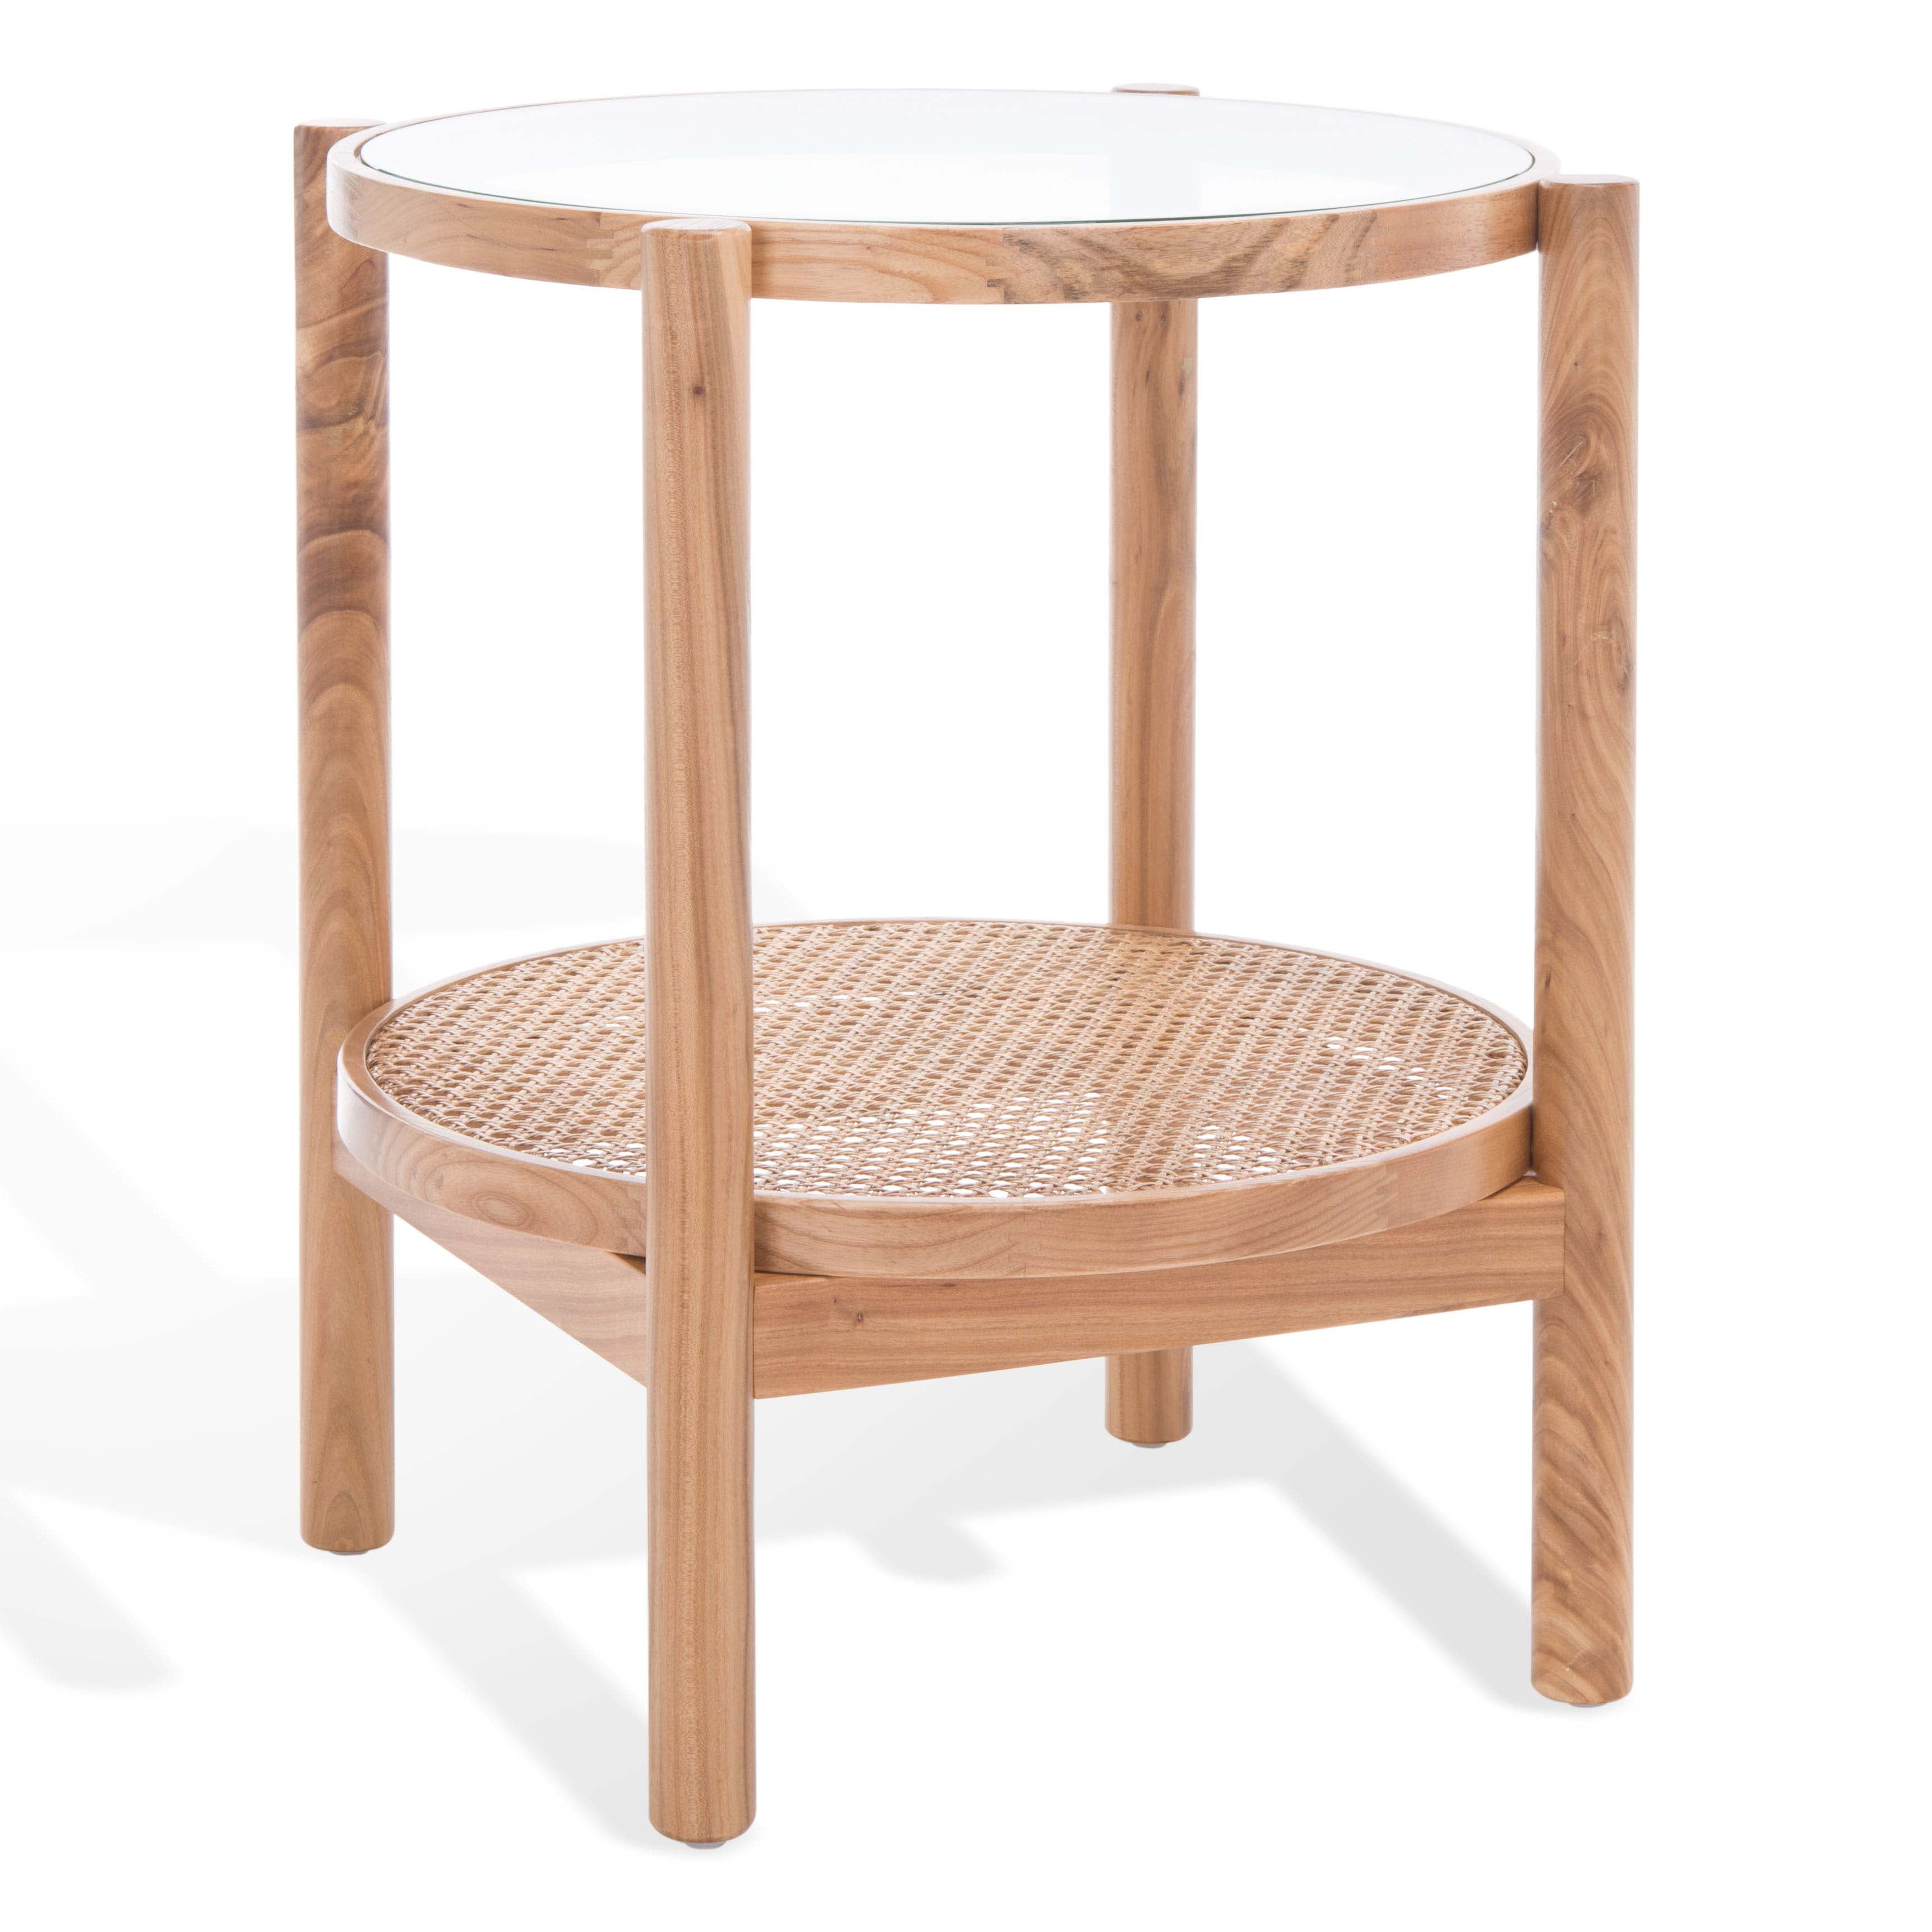 Safavieh Couture Karyna Rattan and Glass Accent Table - Natural / Clear